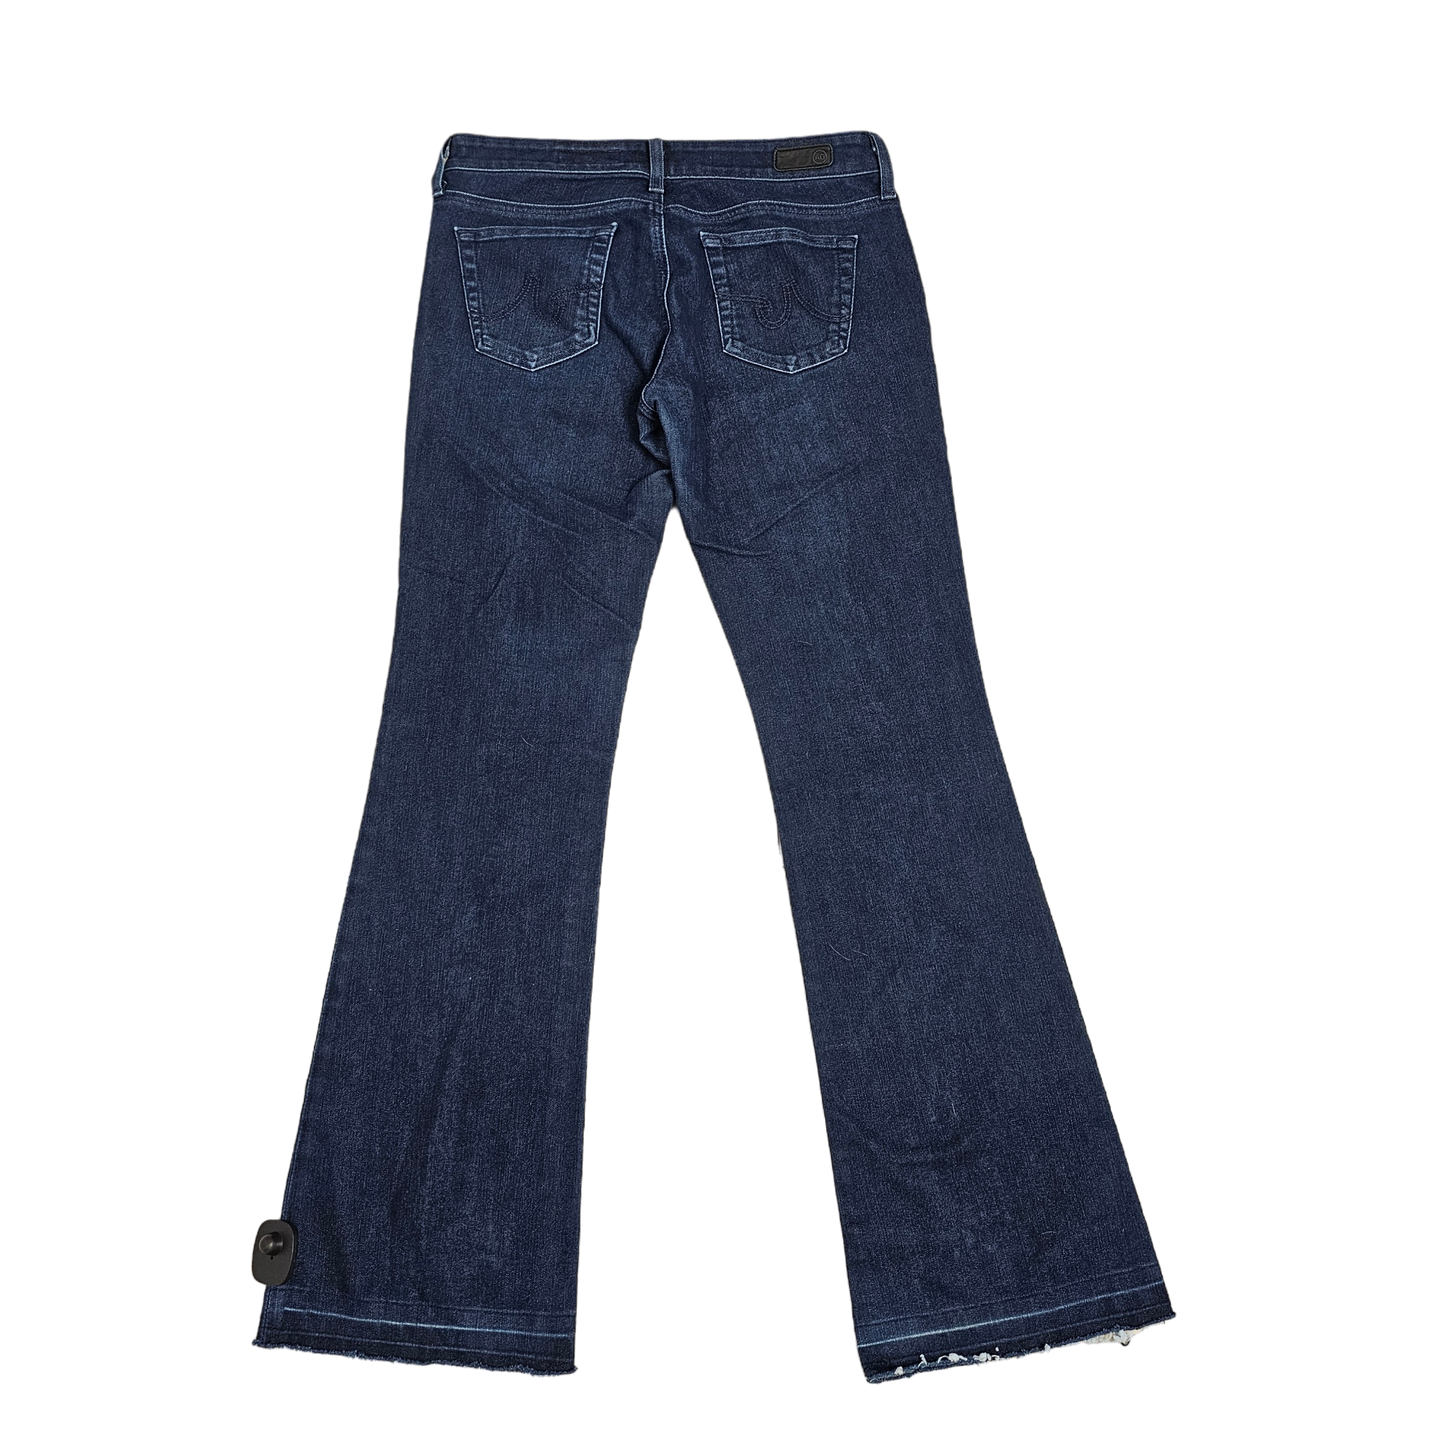 Jeans Designer By Adriano Goldschmied  Size: 8